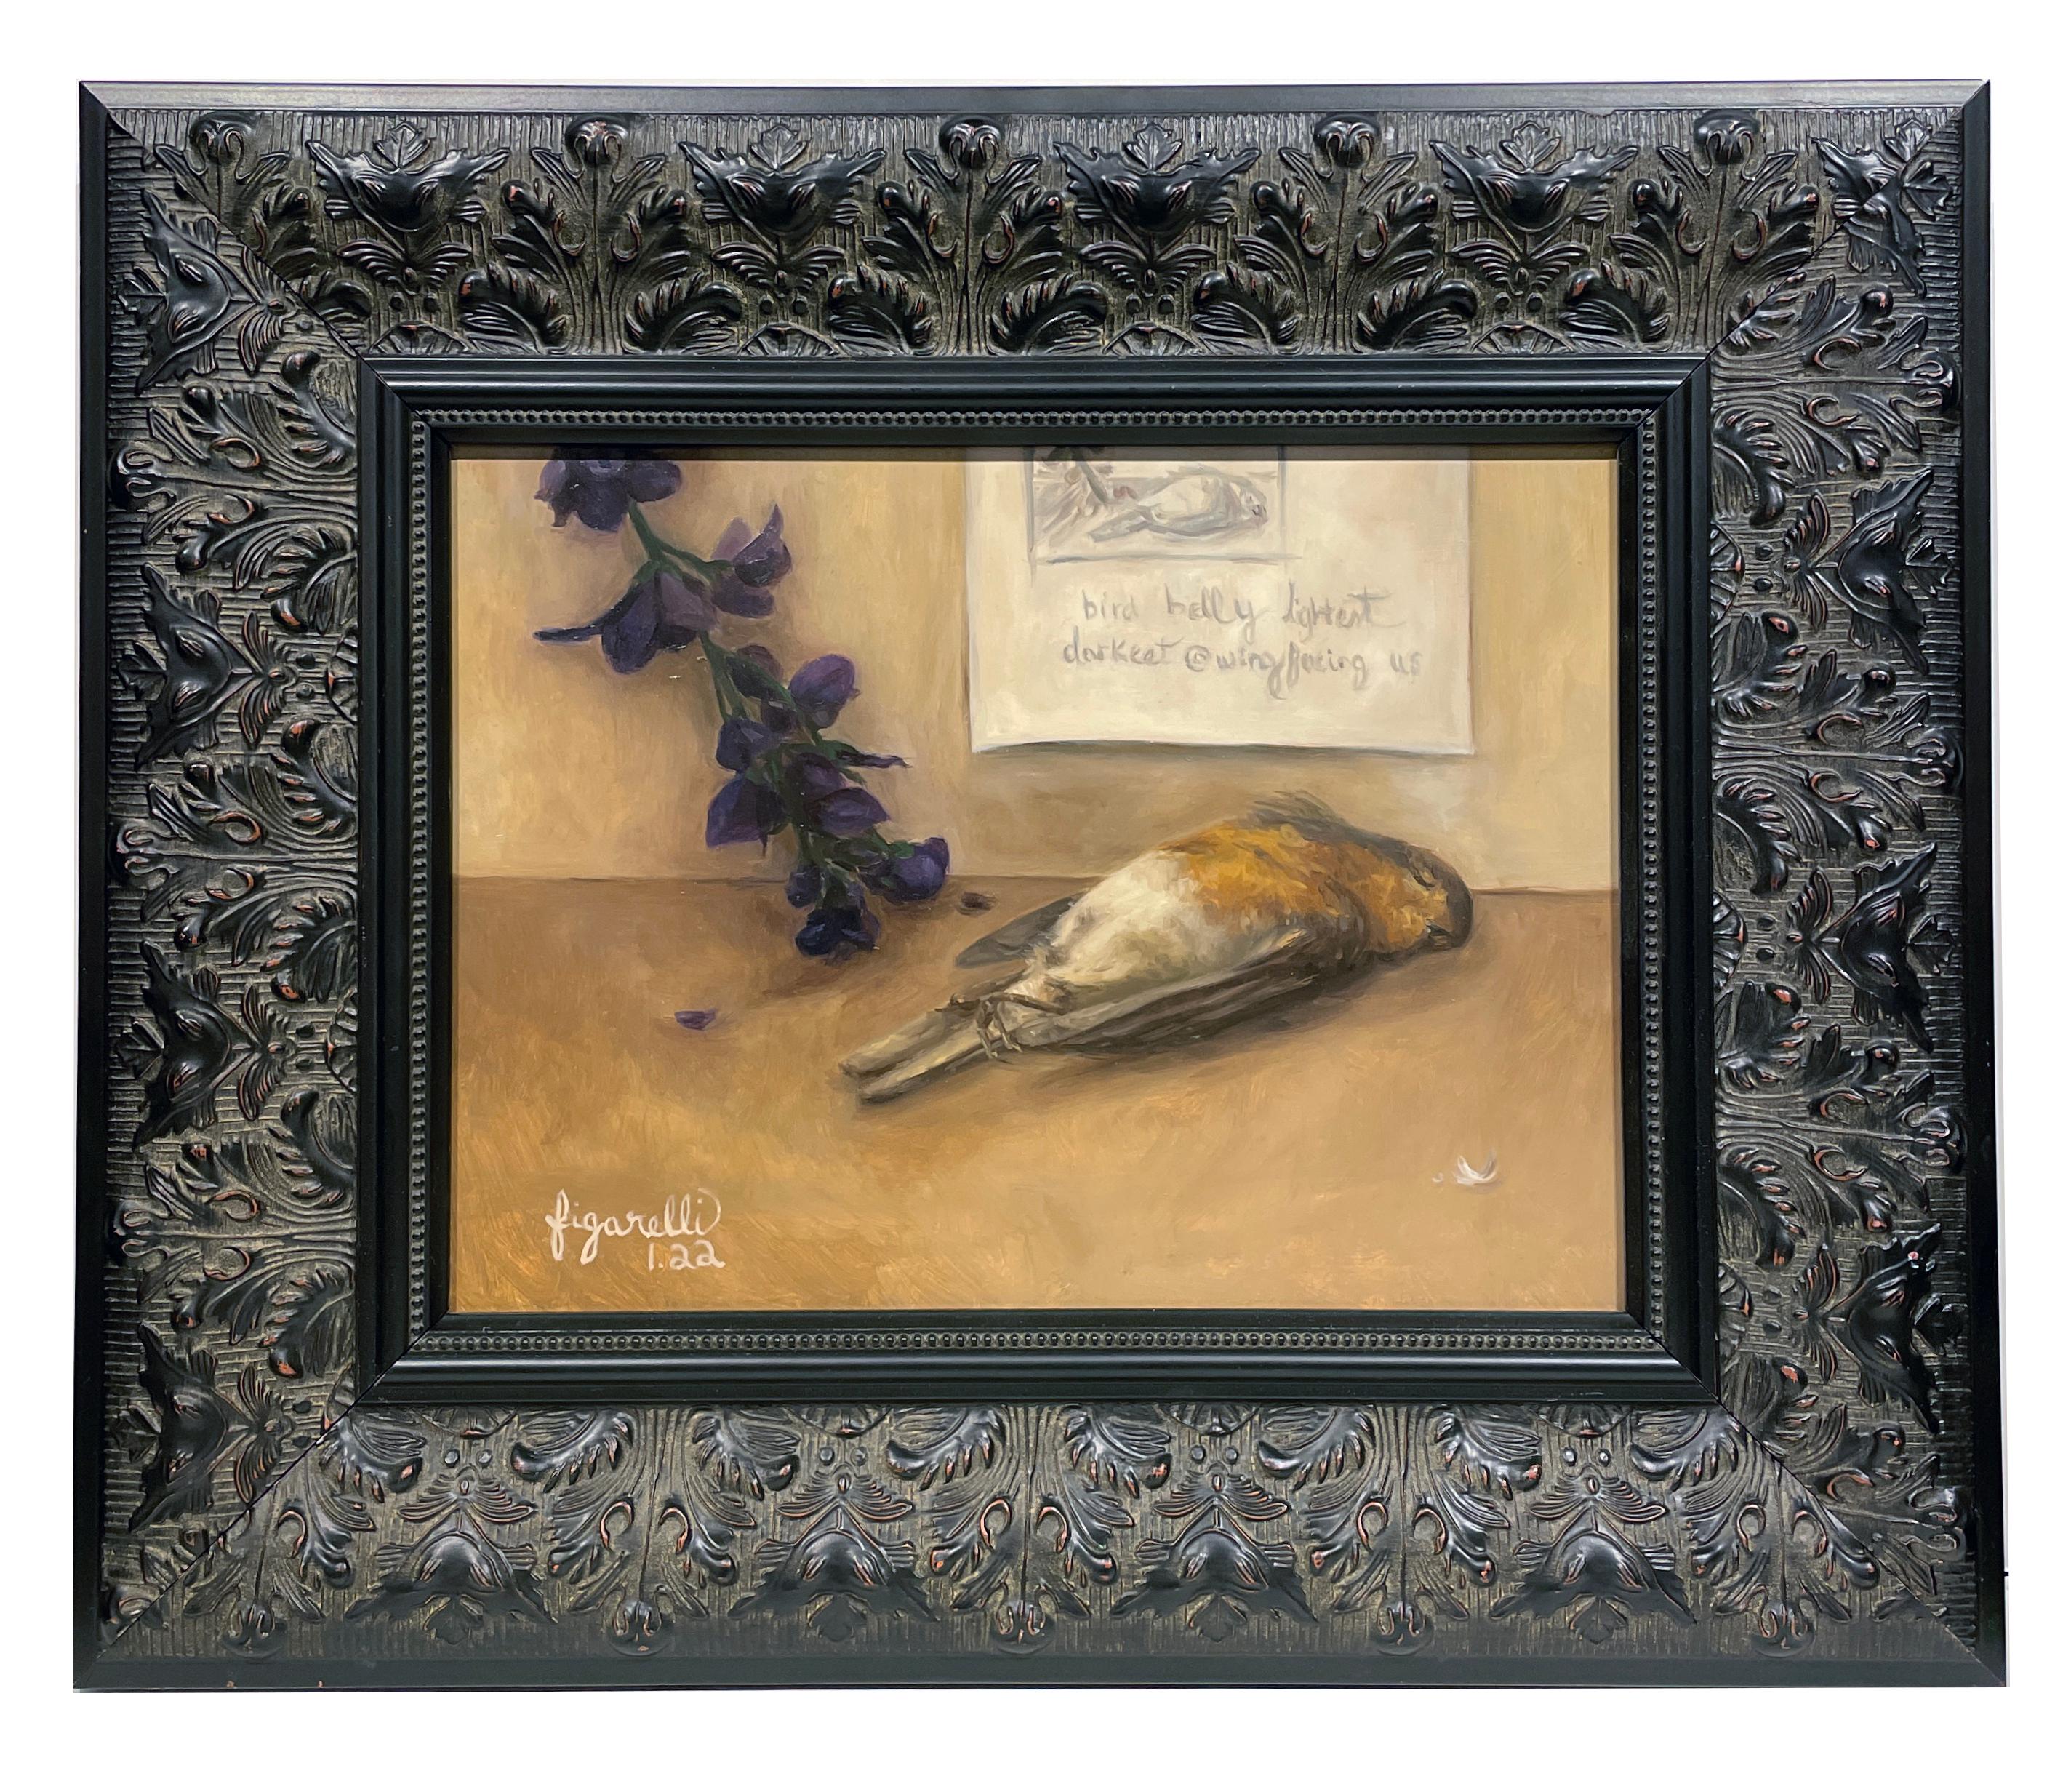 Tina Figarelli Animal Painting - Broken Window - Still Life with Flower, Dead Bird and Note, Oil on Panel, Framed